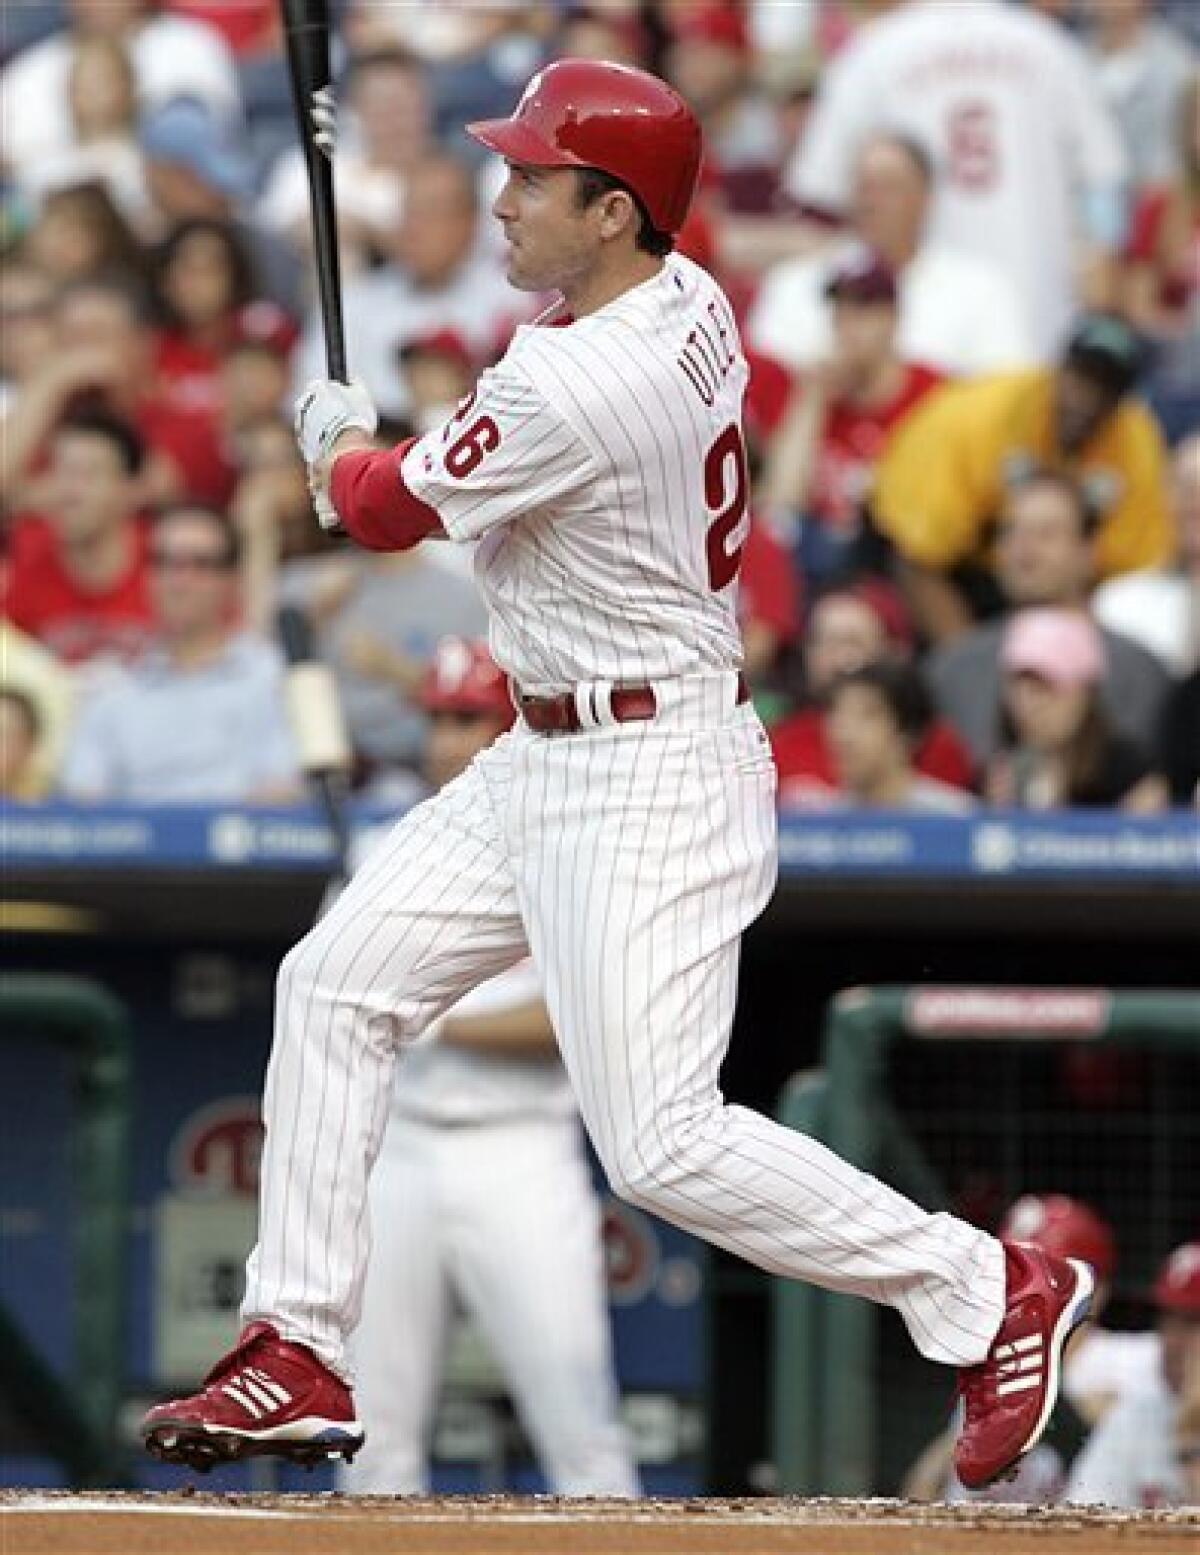 Utley hits 21st HR to lead Phillies past Reds - The San Diego Union-Tribune